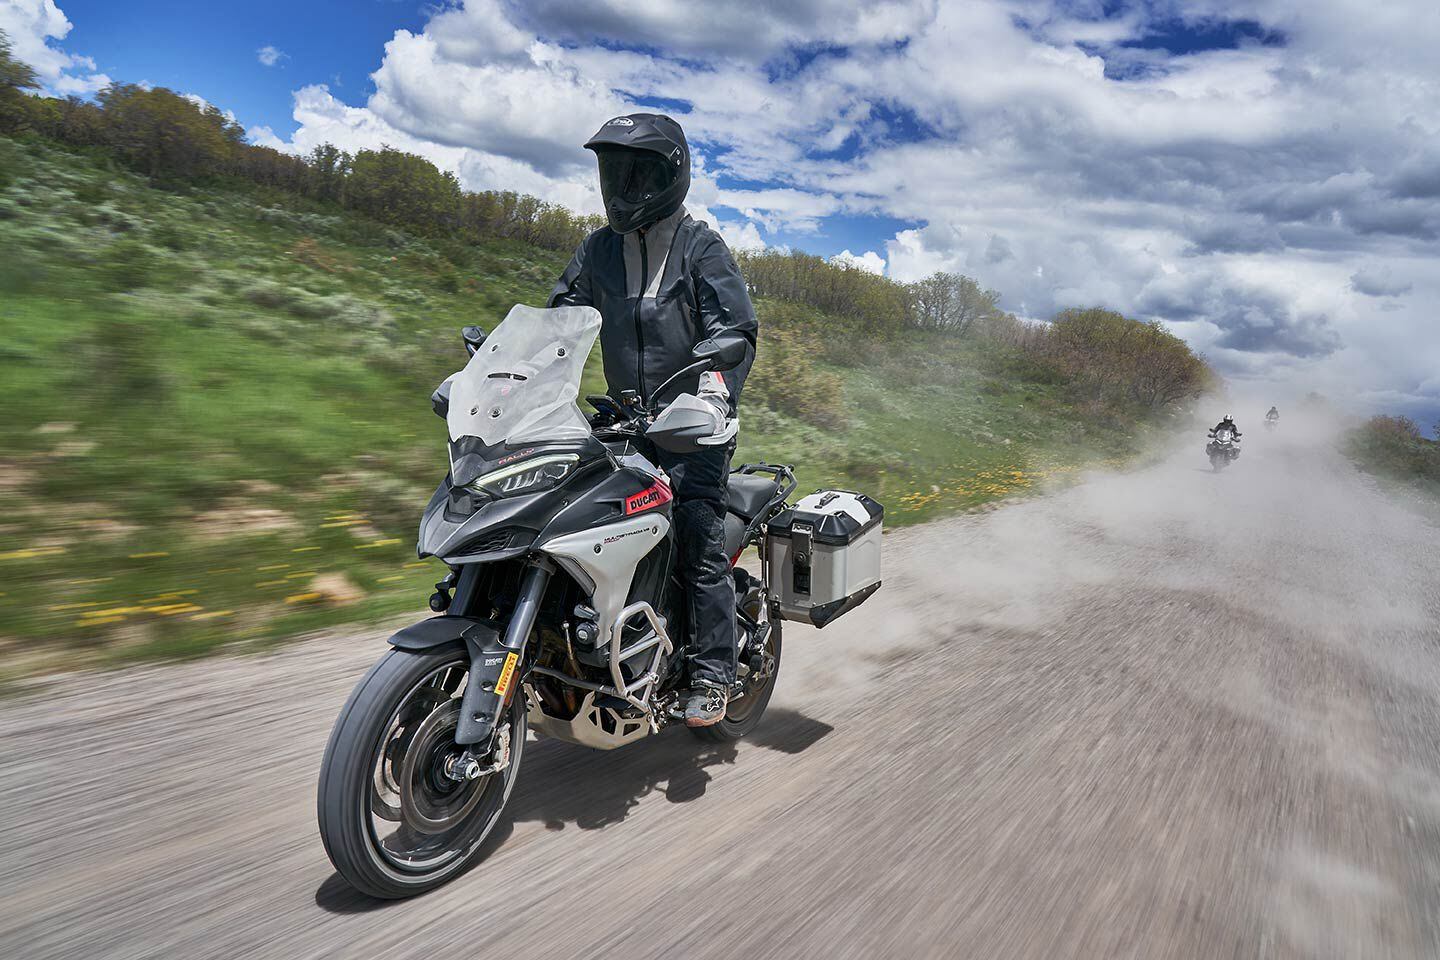 Ducati nailed the riding position for standing off-road; Conner is 5 feet, 11 inches. The reach to the tall bar is ideal, while the view over the windscreen is really good when lowered.